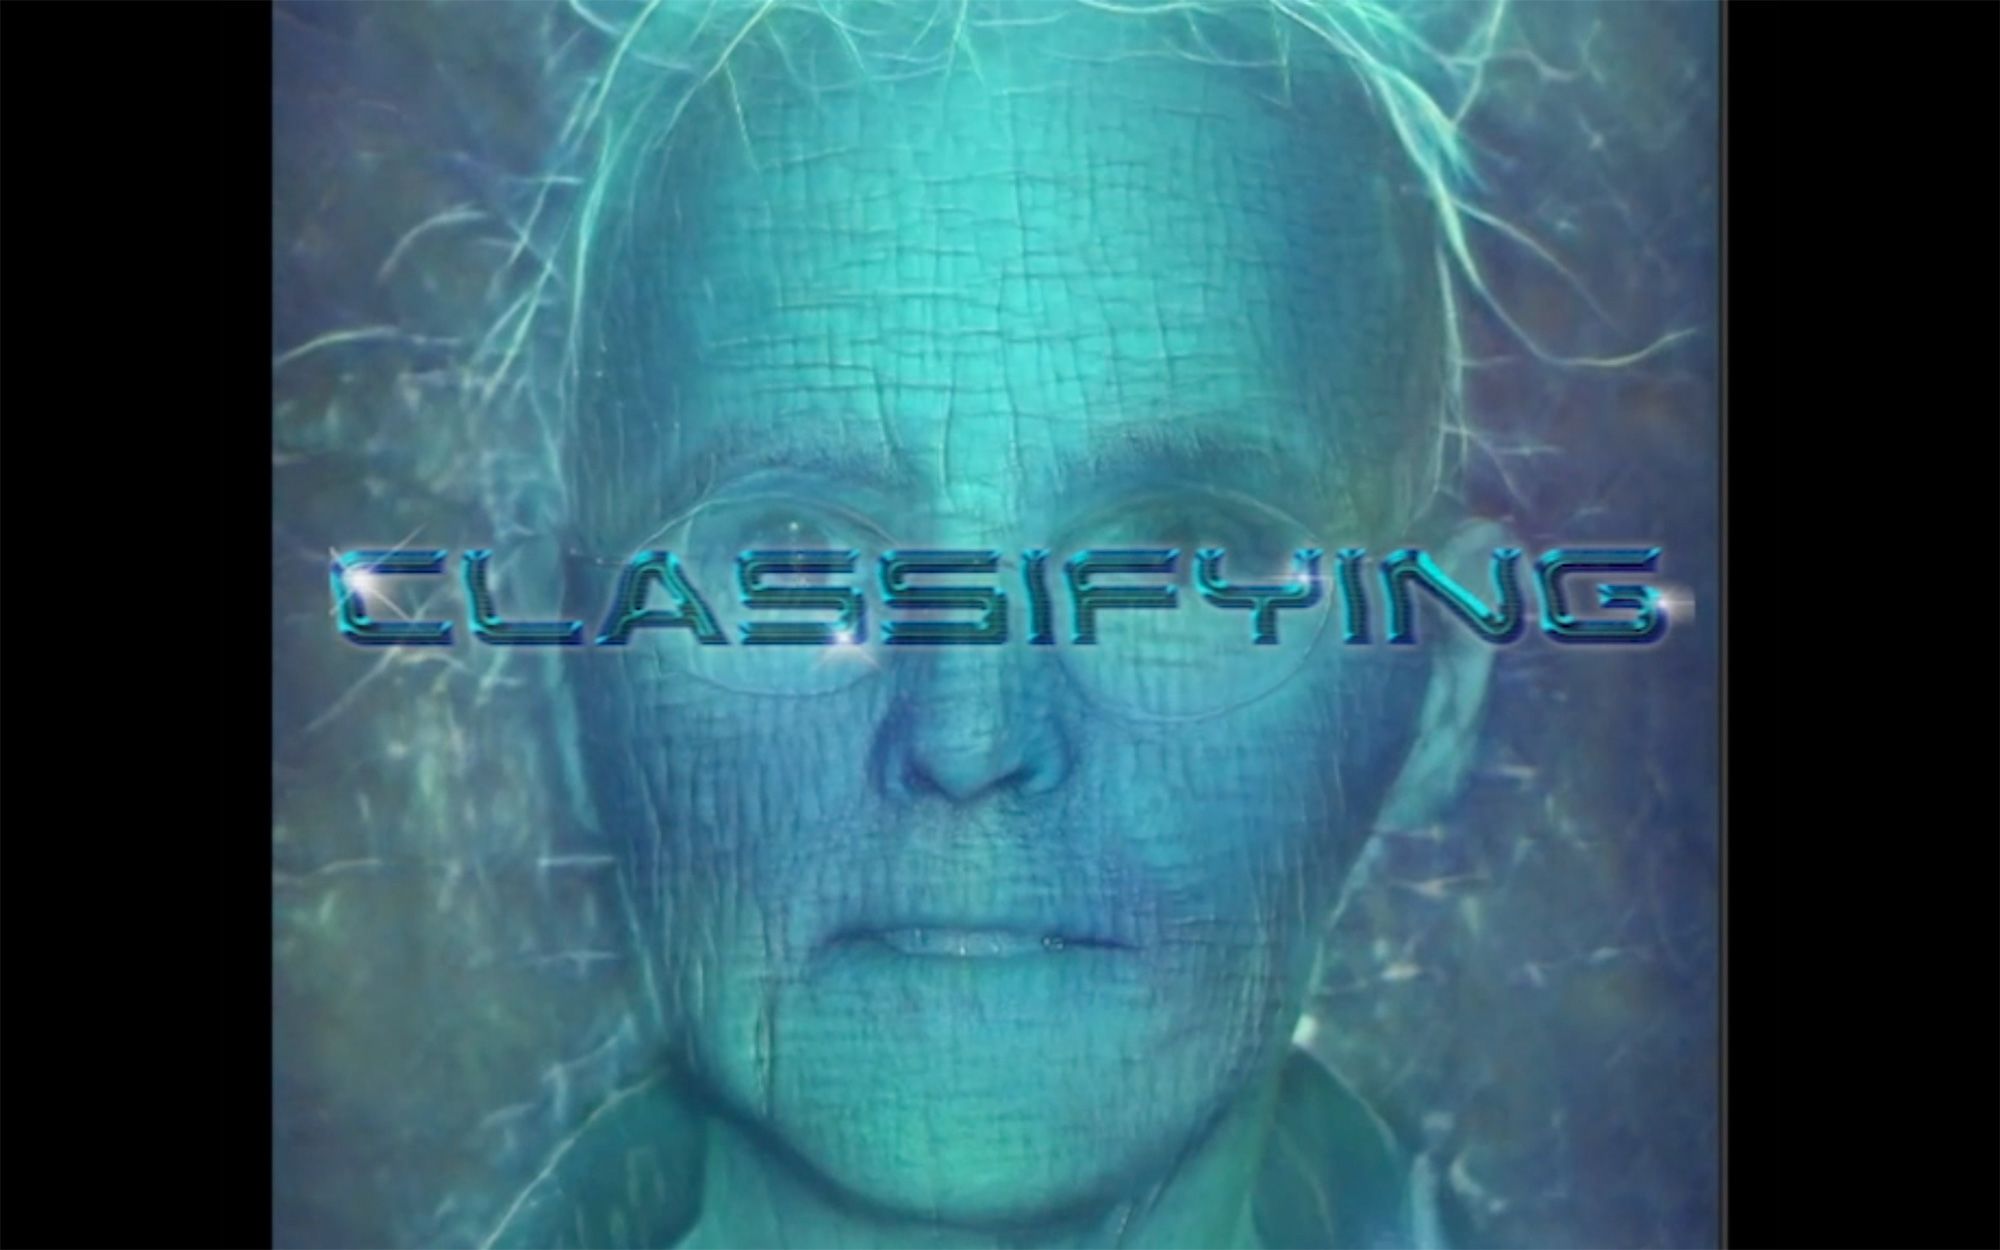 Digitally created image, showing a human male face, subject is wearing glasses and has wrinkled skin. The text ‘classifying’ is overlayed over the face.